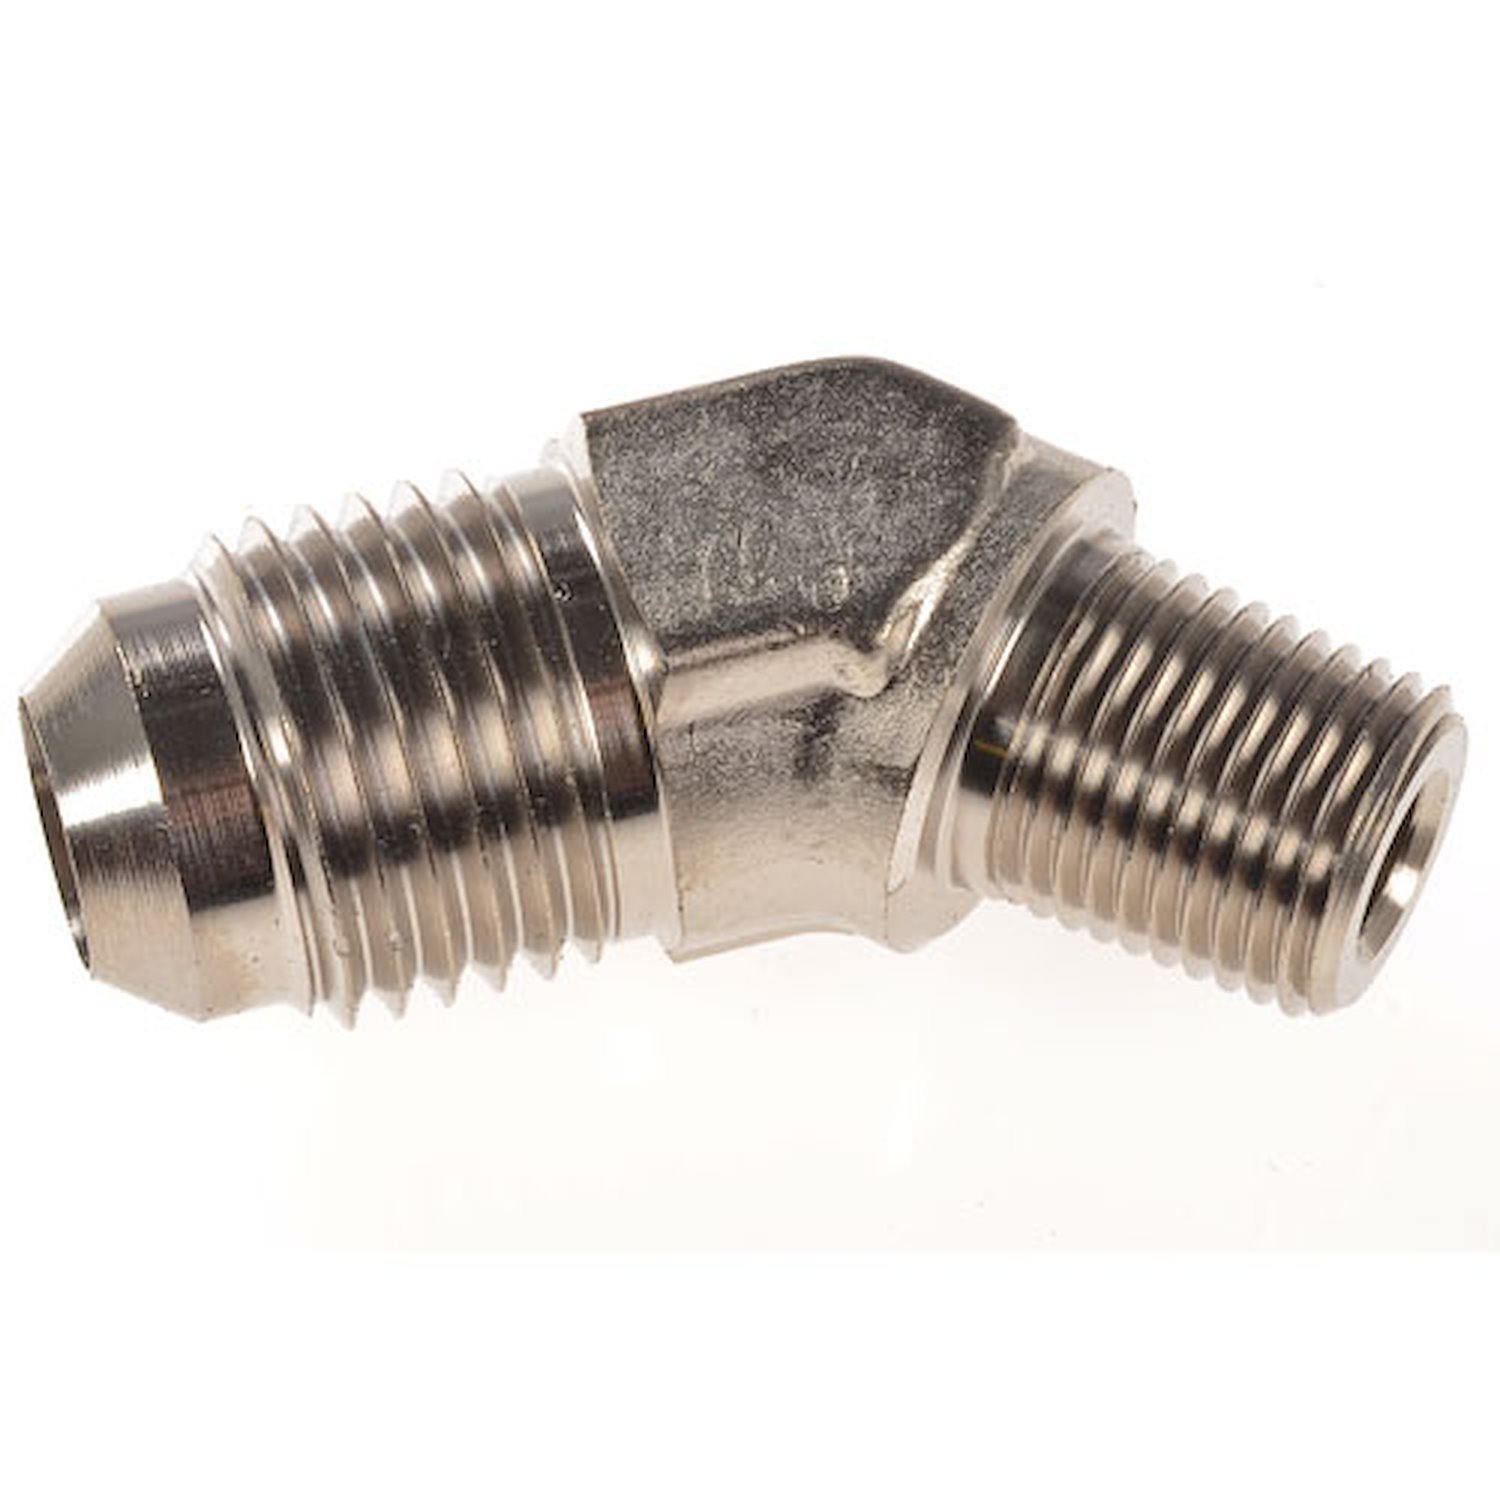 Nickel 45 degree Flare Fitting [1/8 in. NPT to -6 AN Flare]